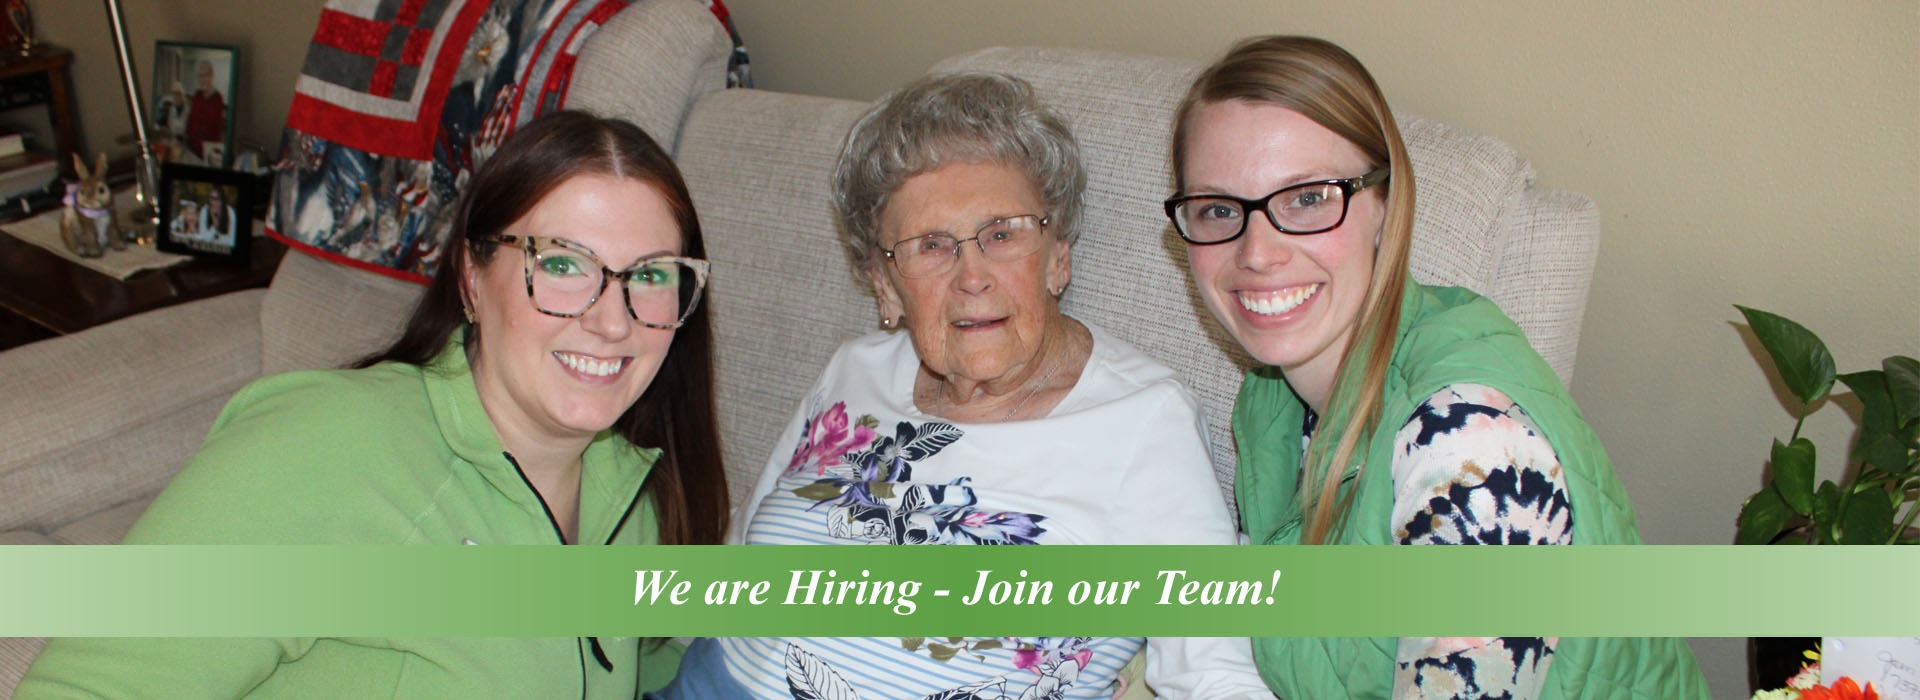 Hiring for Hospice Workers